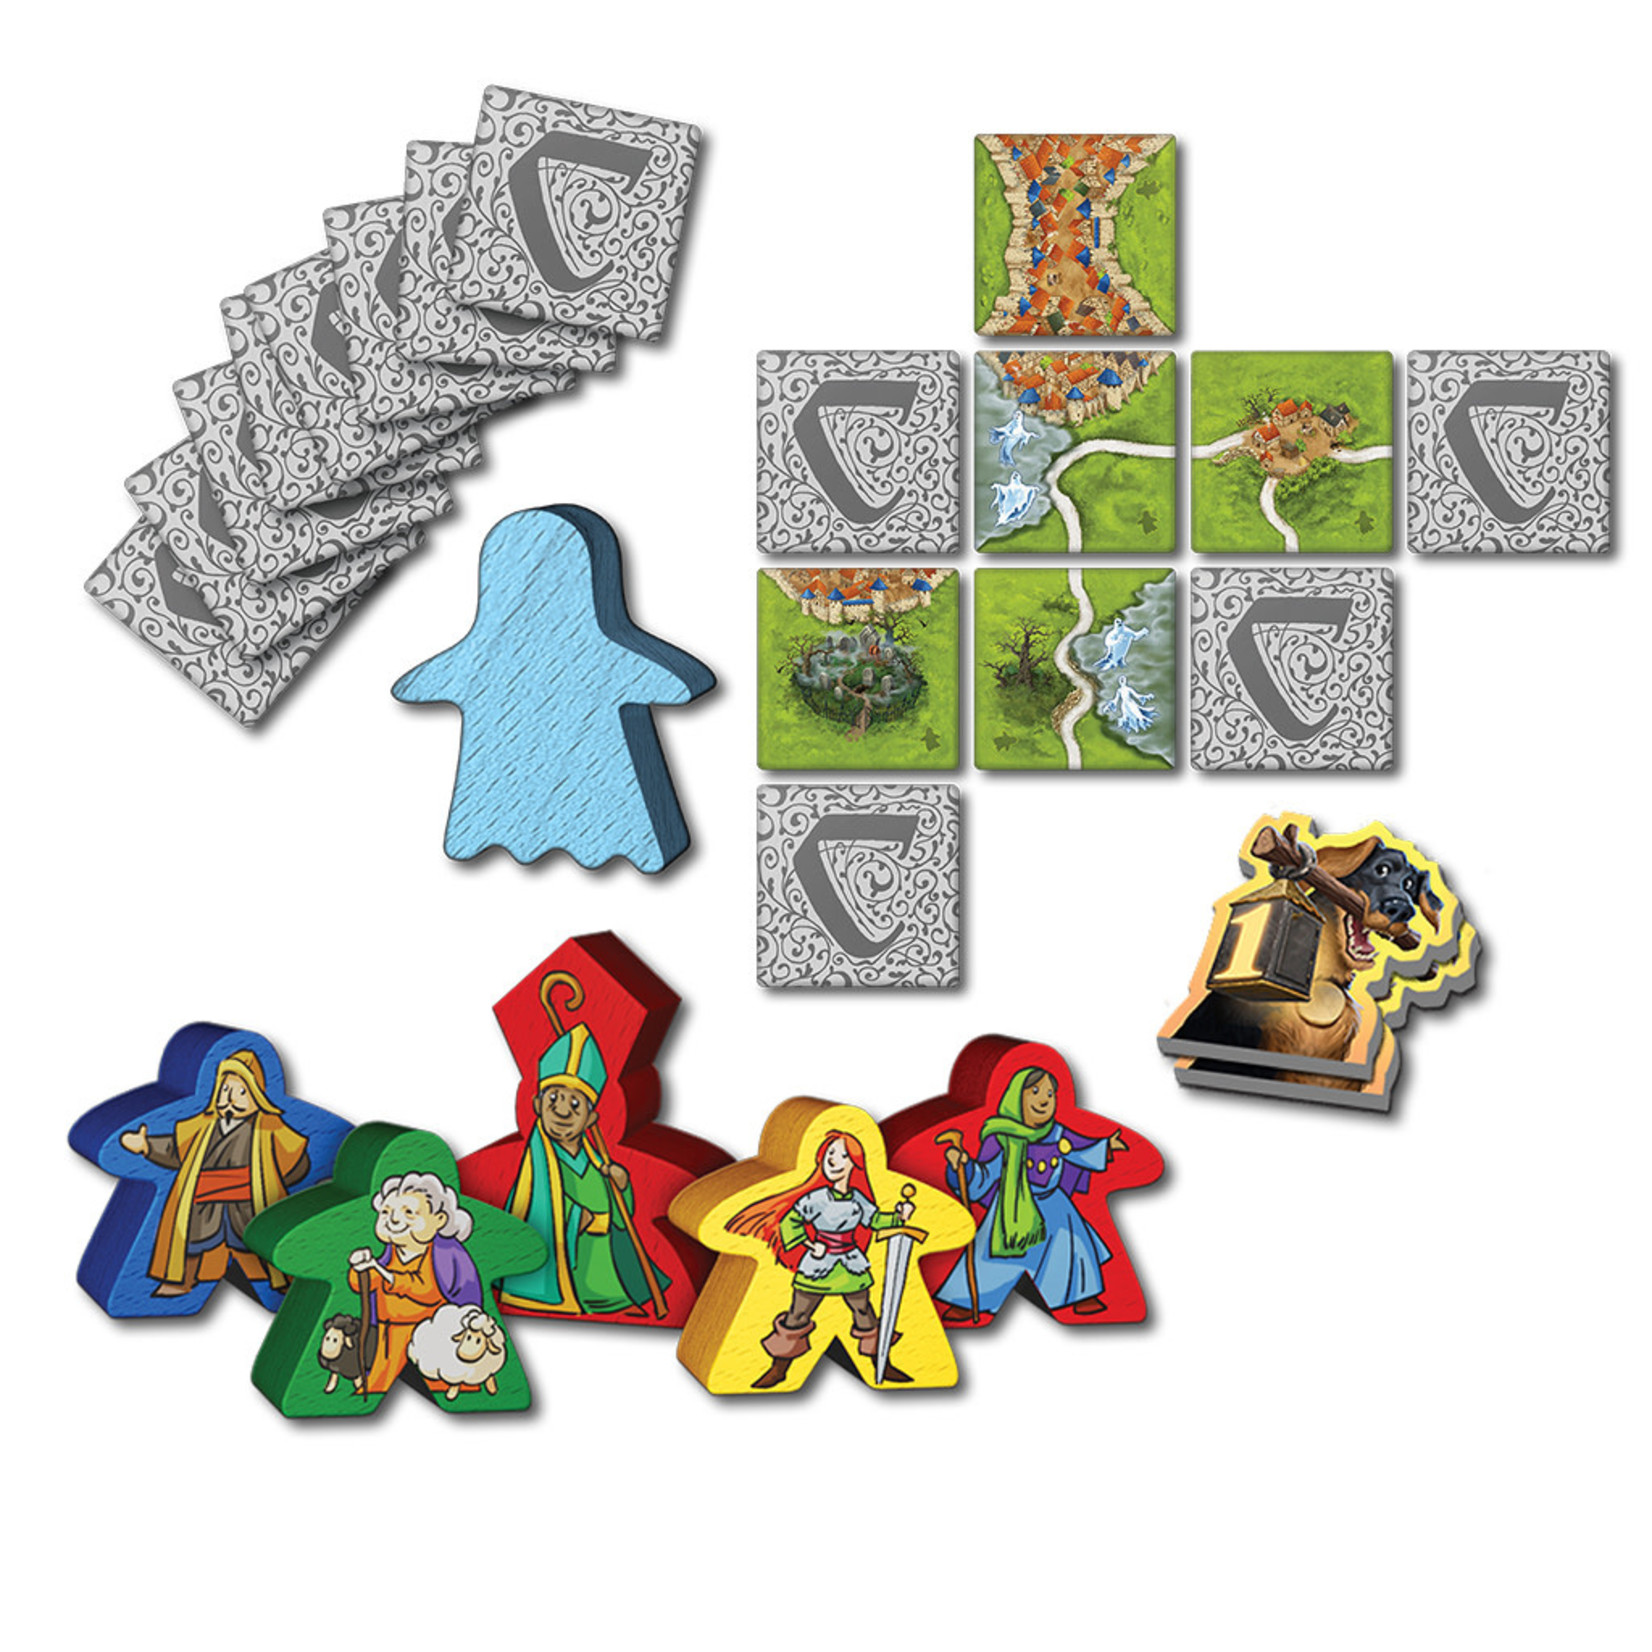 Z-Man Games PREORDER: Mists Over Carcassonne